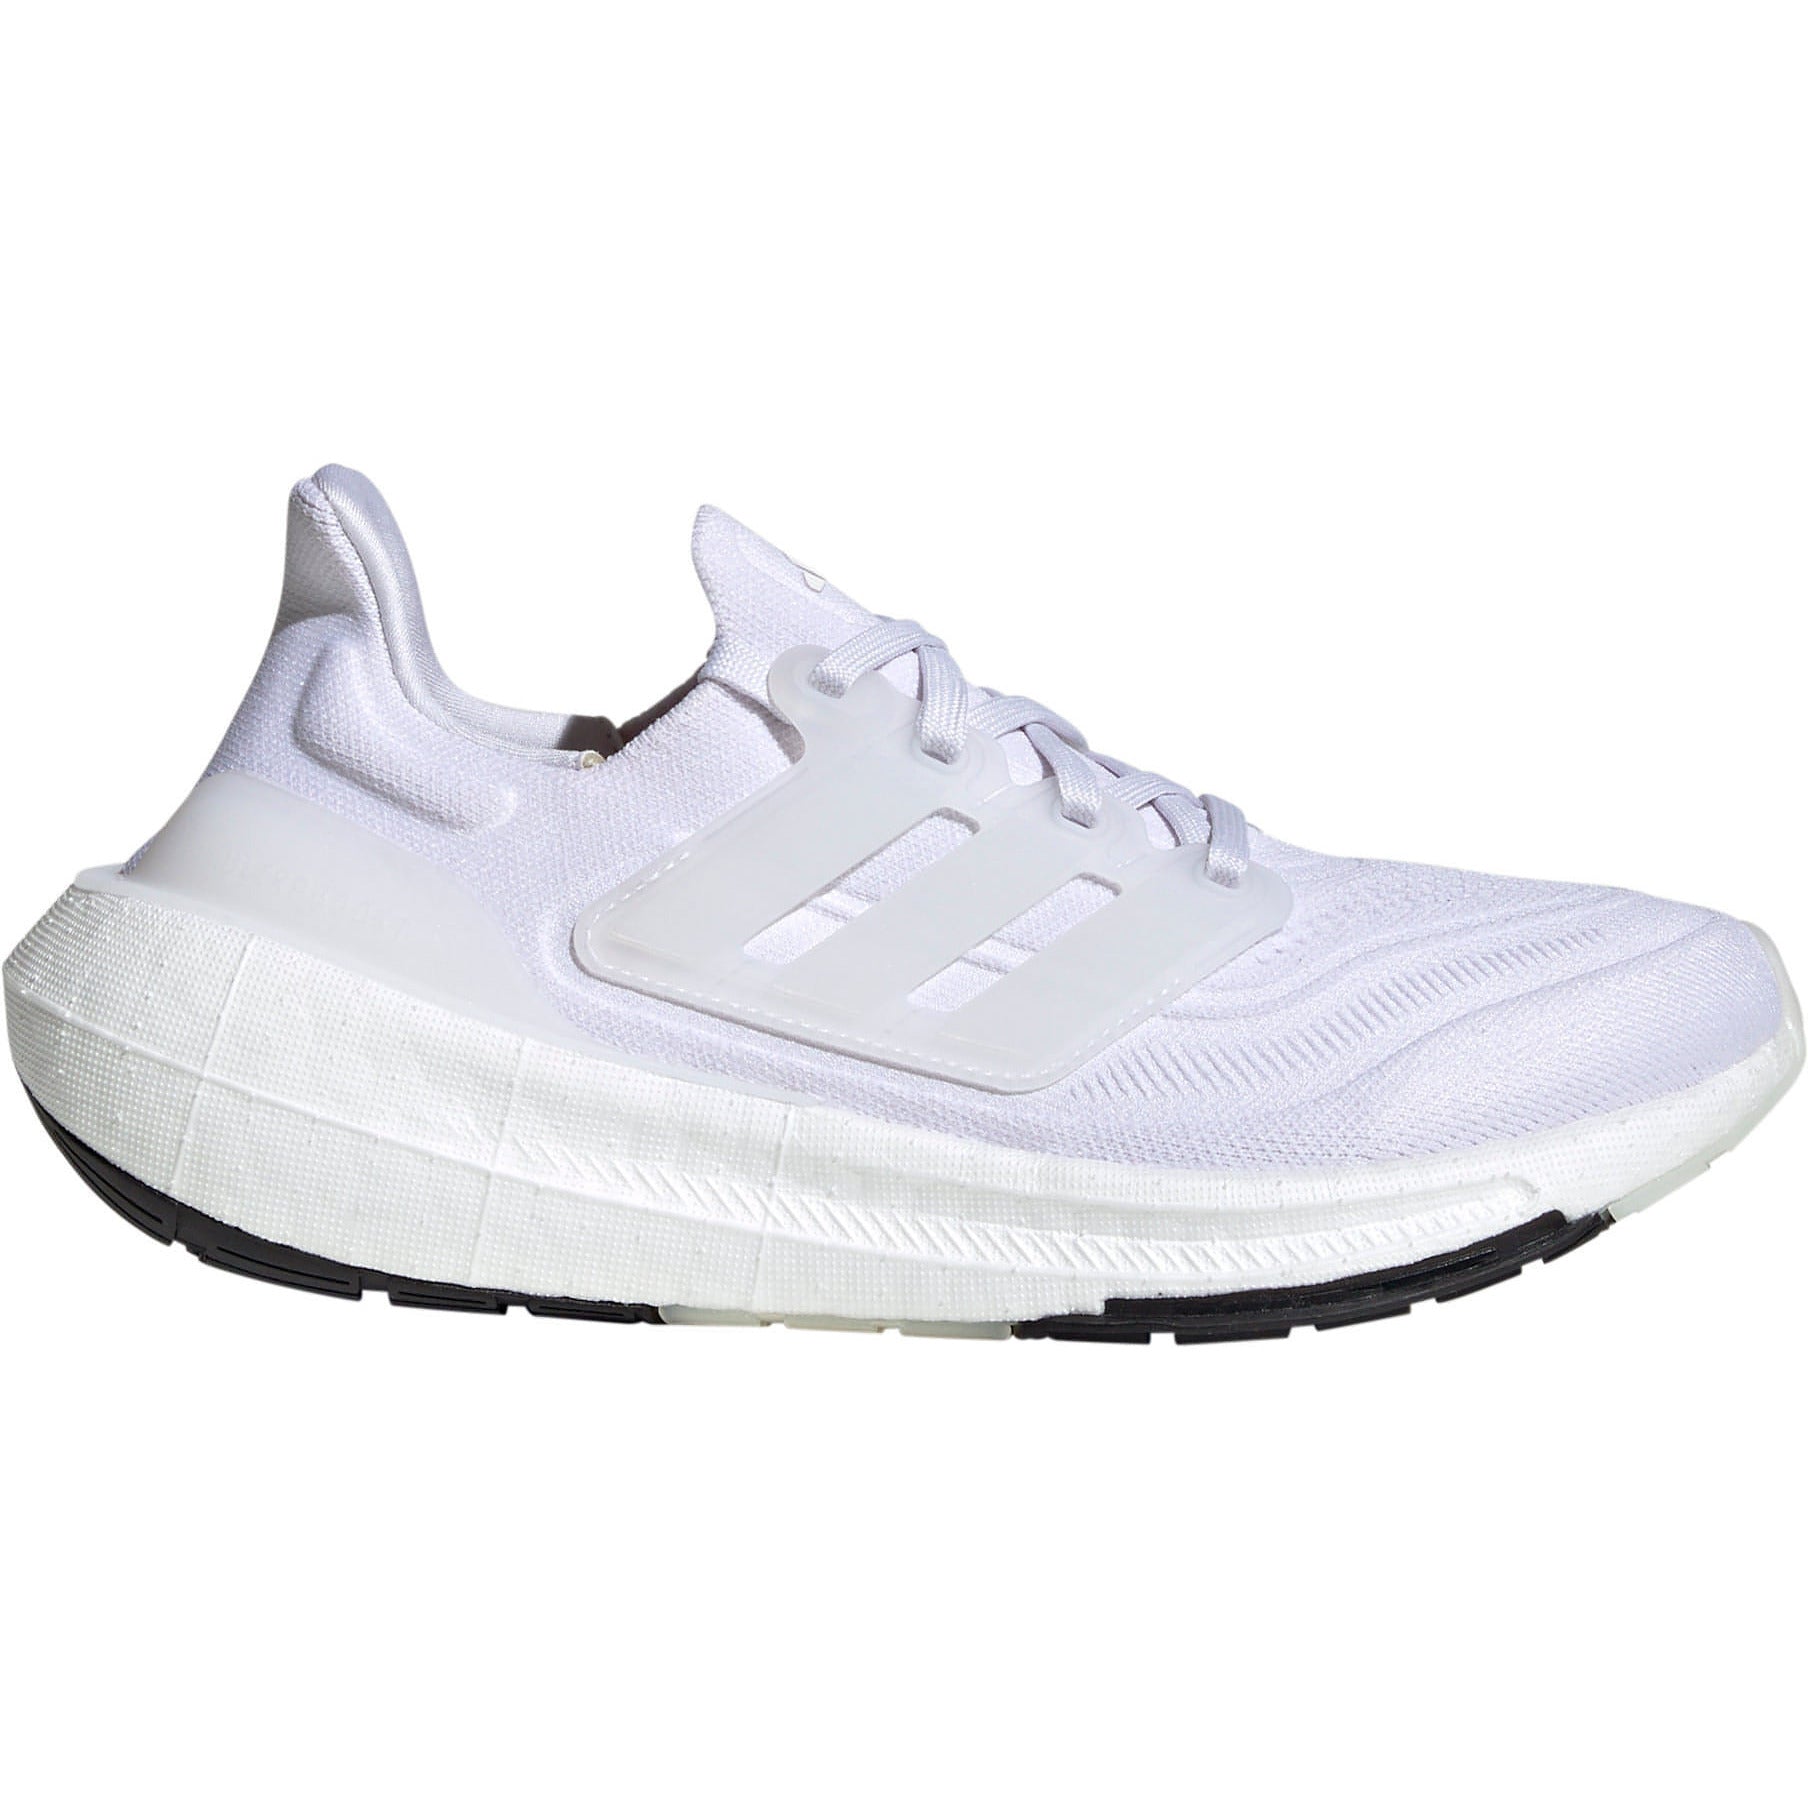 adidas Ultra Boost Light Womens Running Shoes - White